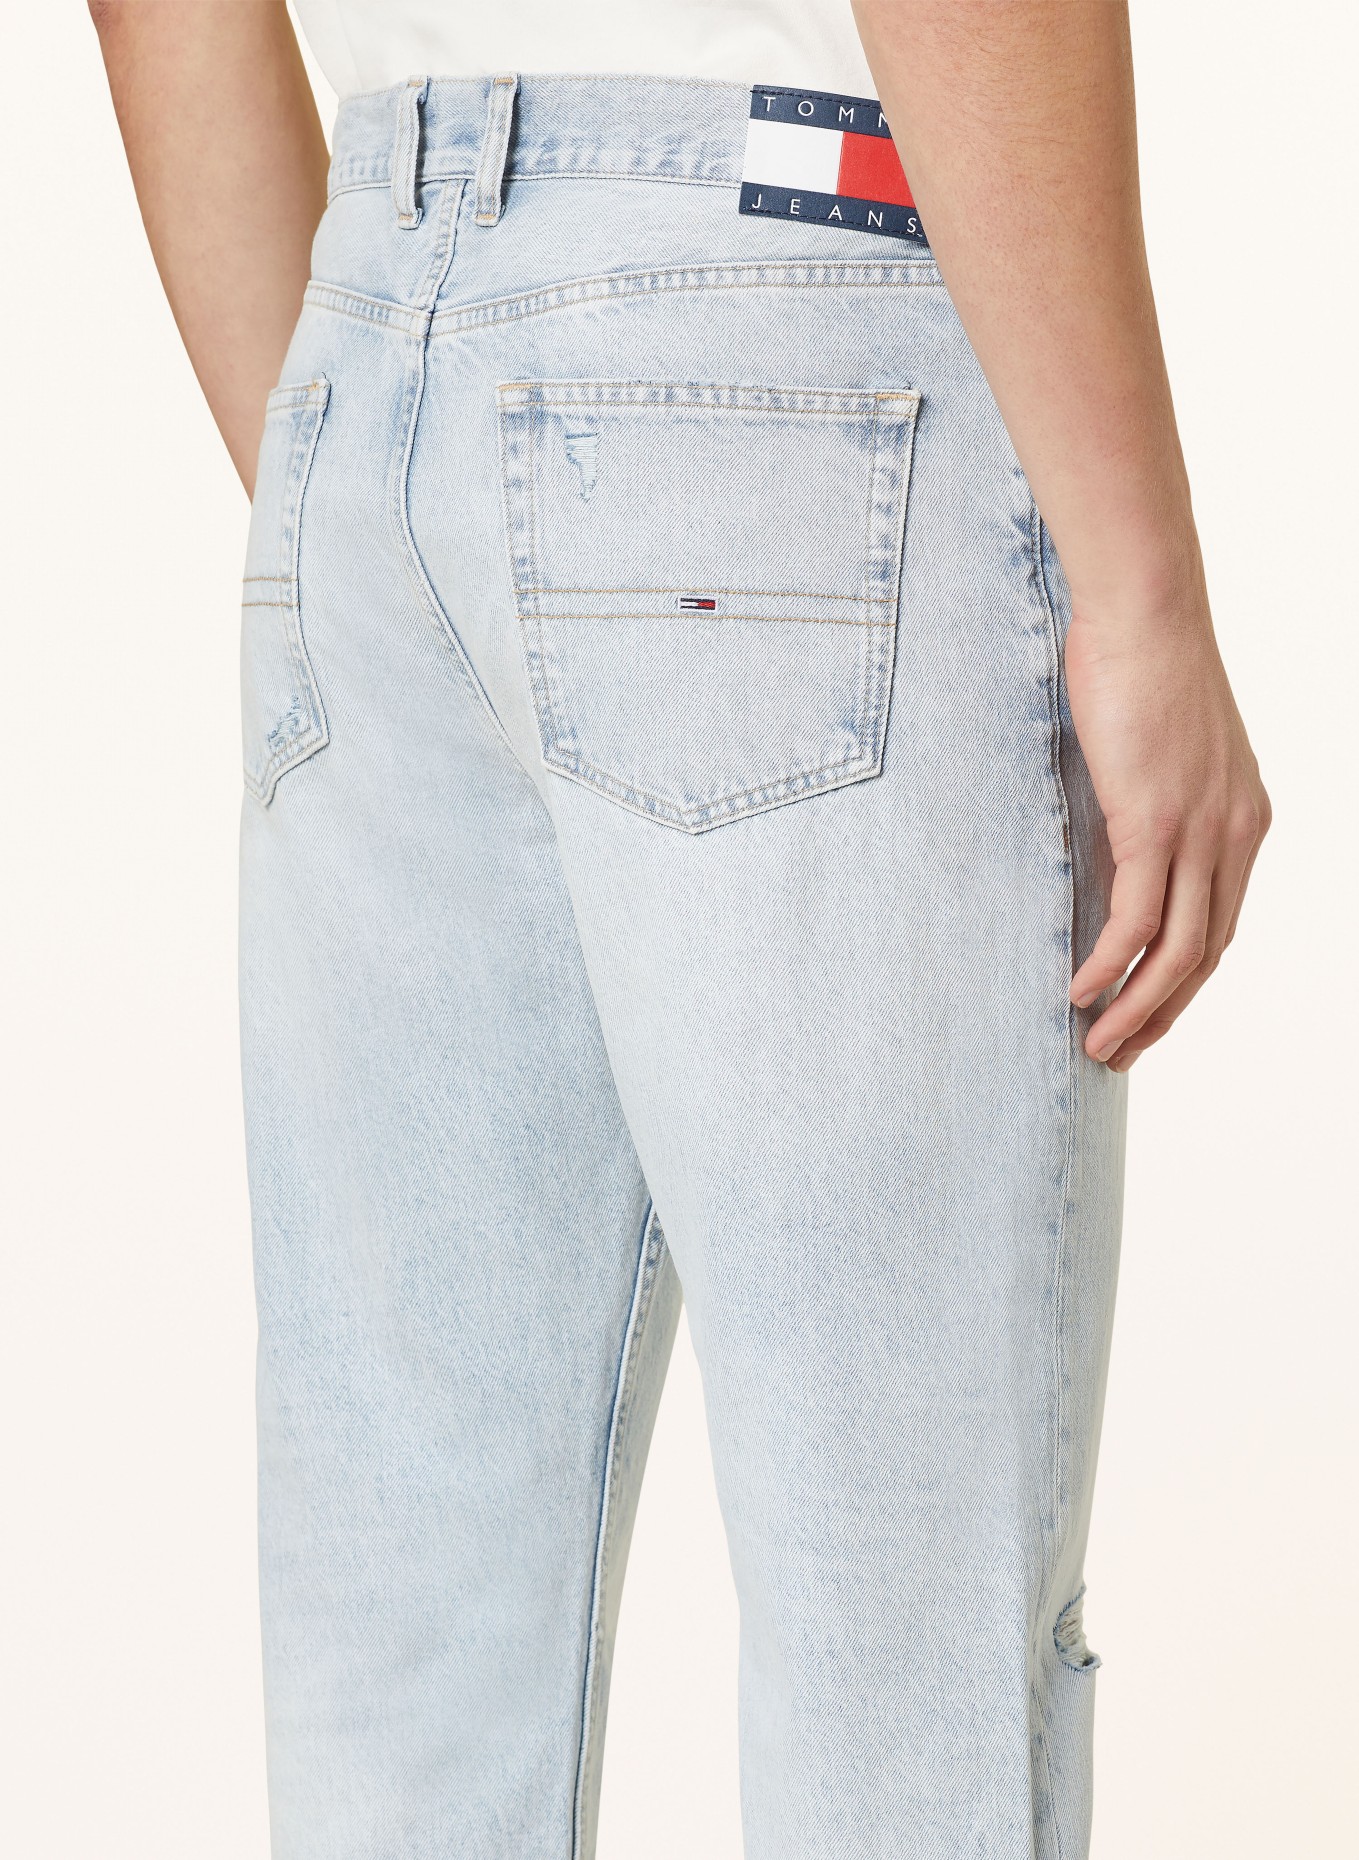 TOMMY JEANS Jeans ISAAC Relaxed Tapered Fit, Farbe: 1AB Denim Light (Bild 6)